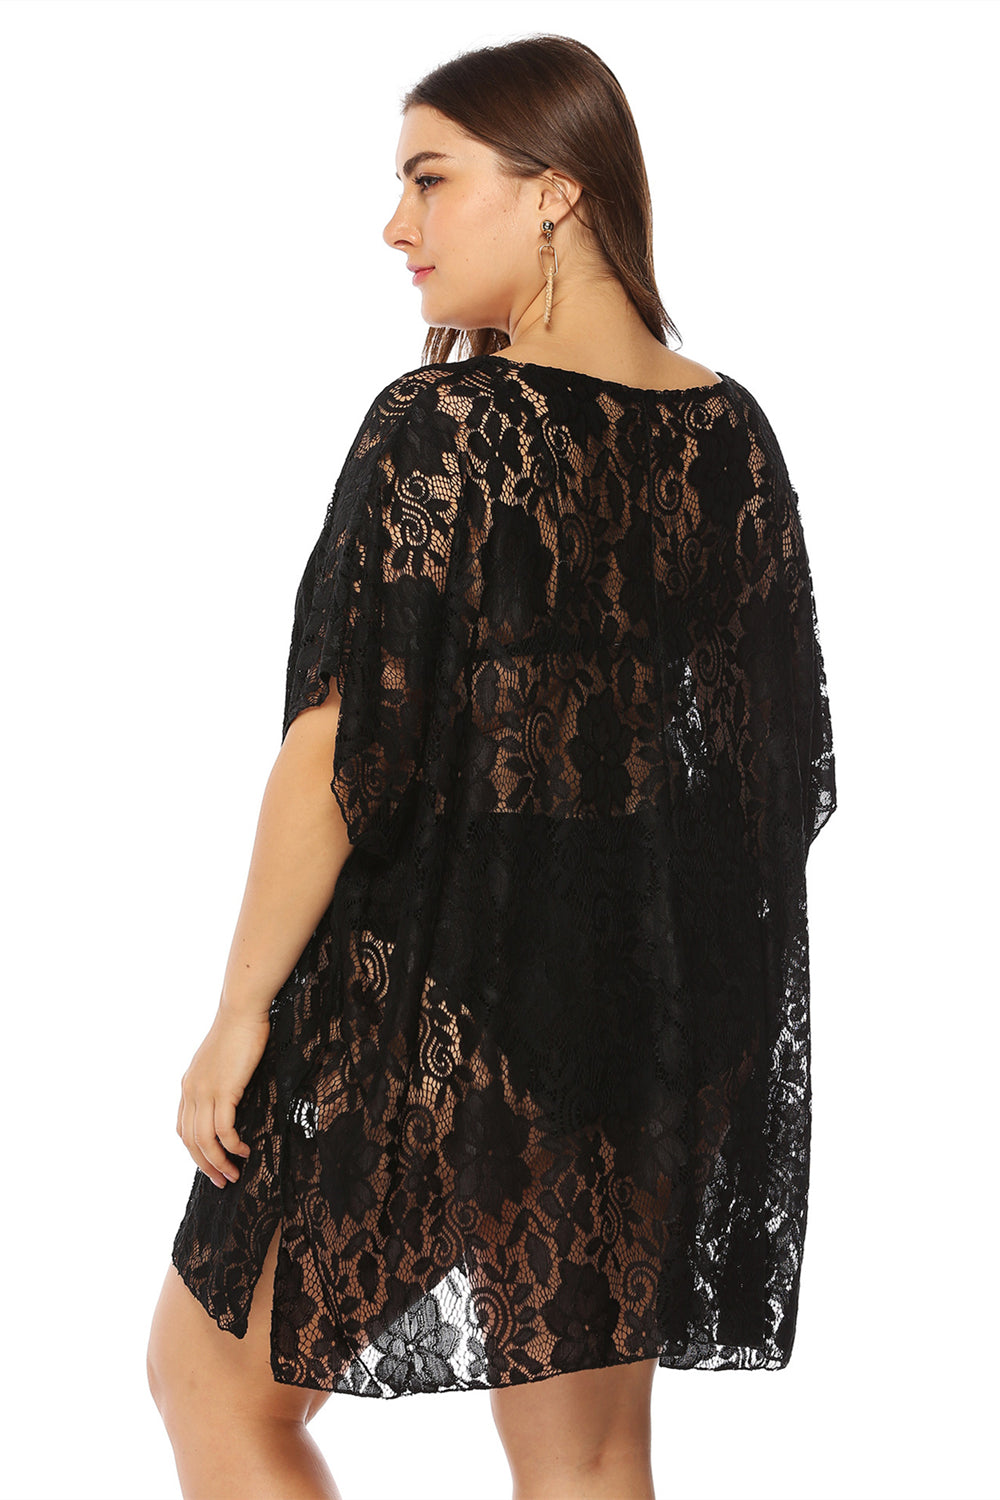 Black Lace Plus Size Half Sleeve Cover Up